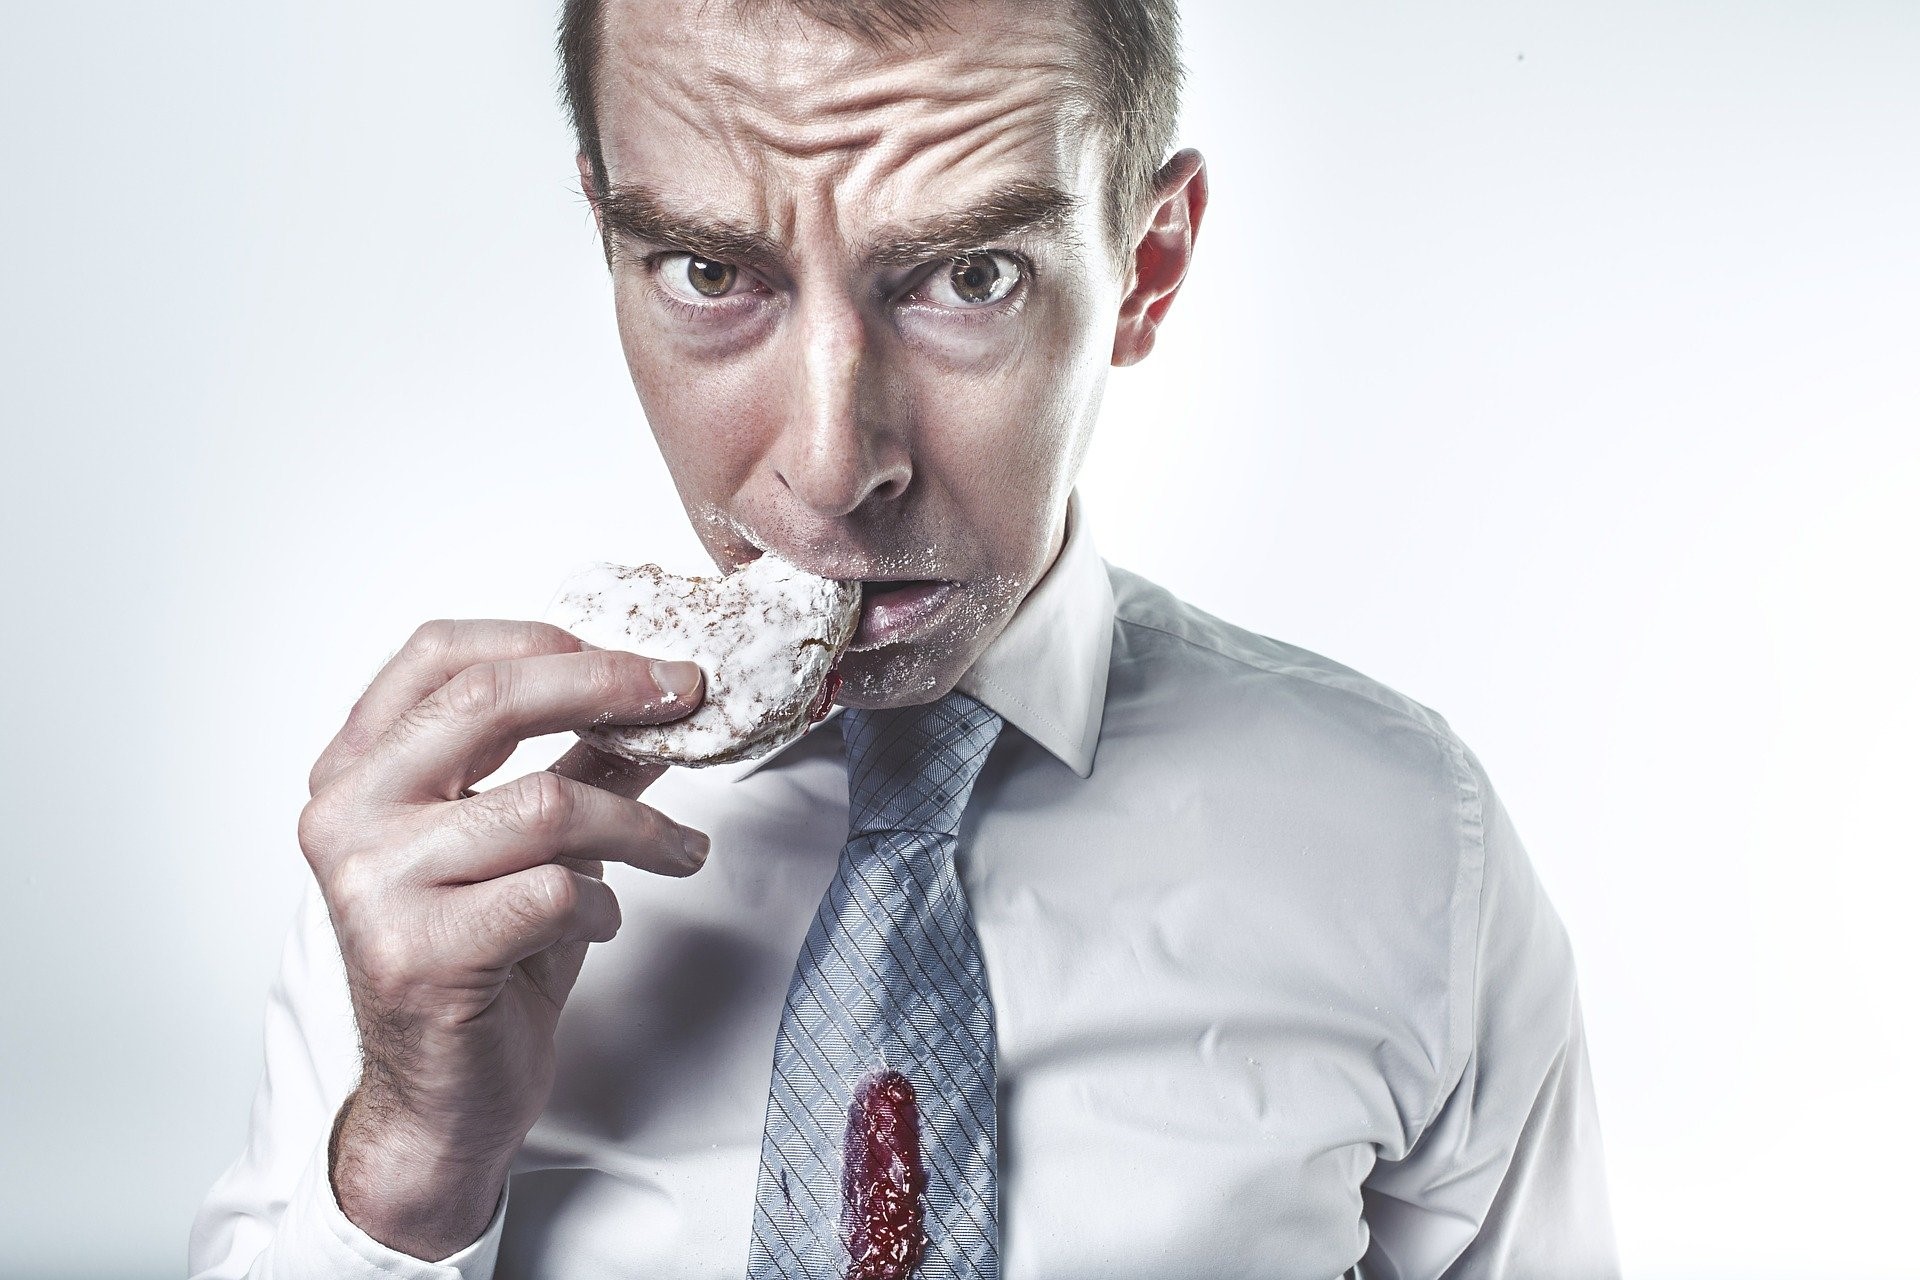 worried man eating a donut with jam spilled on his tie